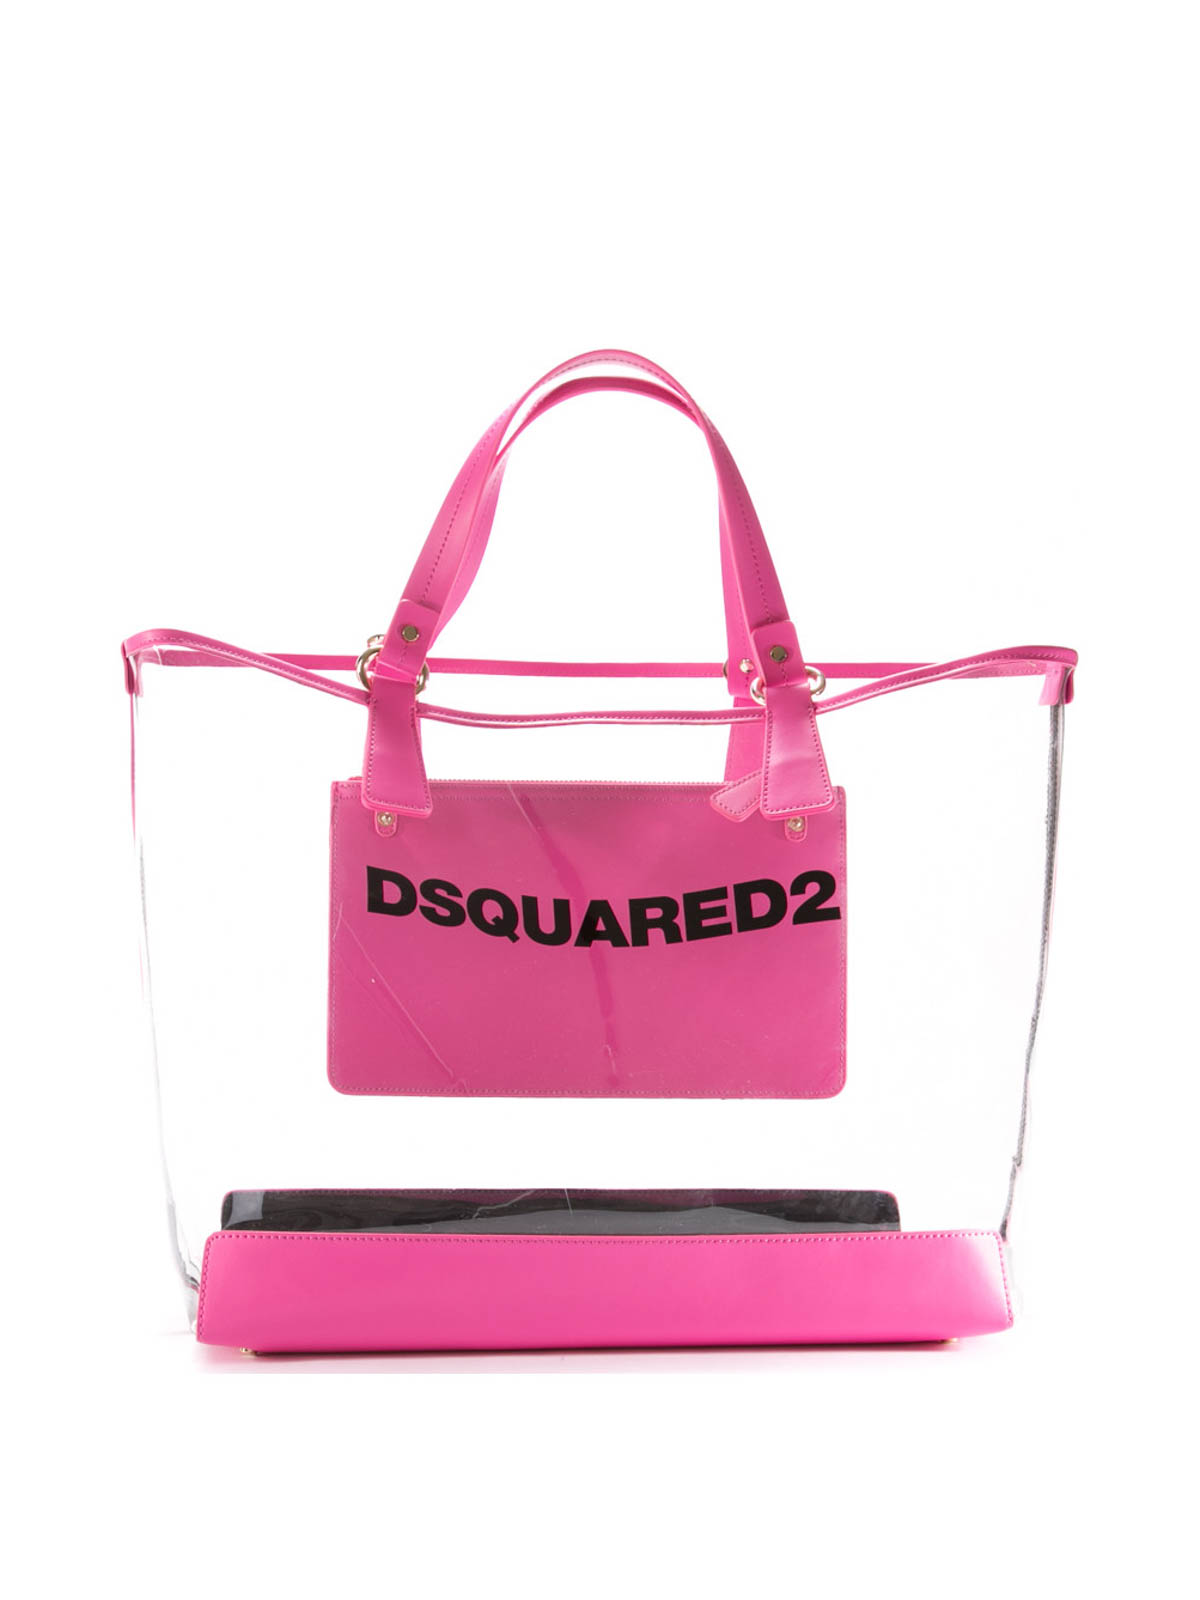 Kluisje effect Haas Totes bags Dsquared2 - PVC shopping bag - SP51954769193 | iKRIX.com